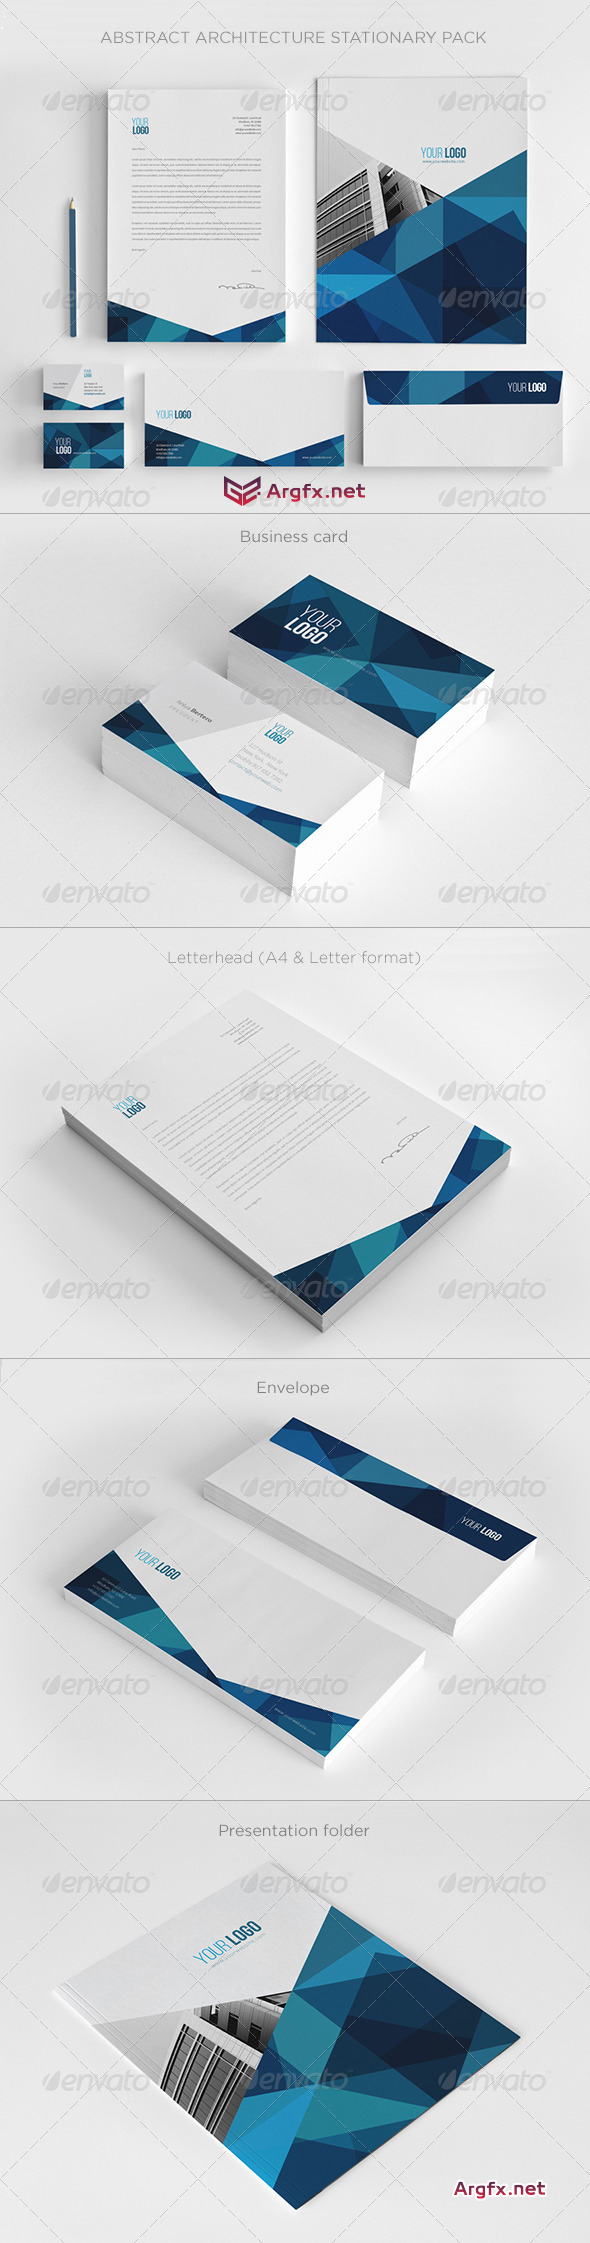  GraphicRiver - Abstract Architecture Stationery Pack 7205071